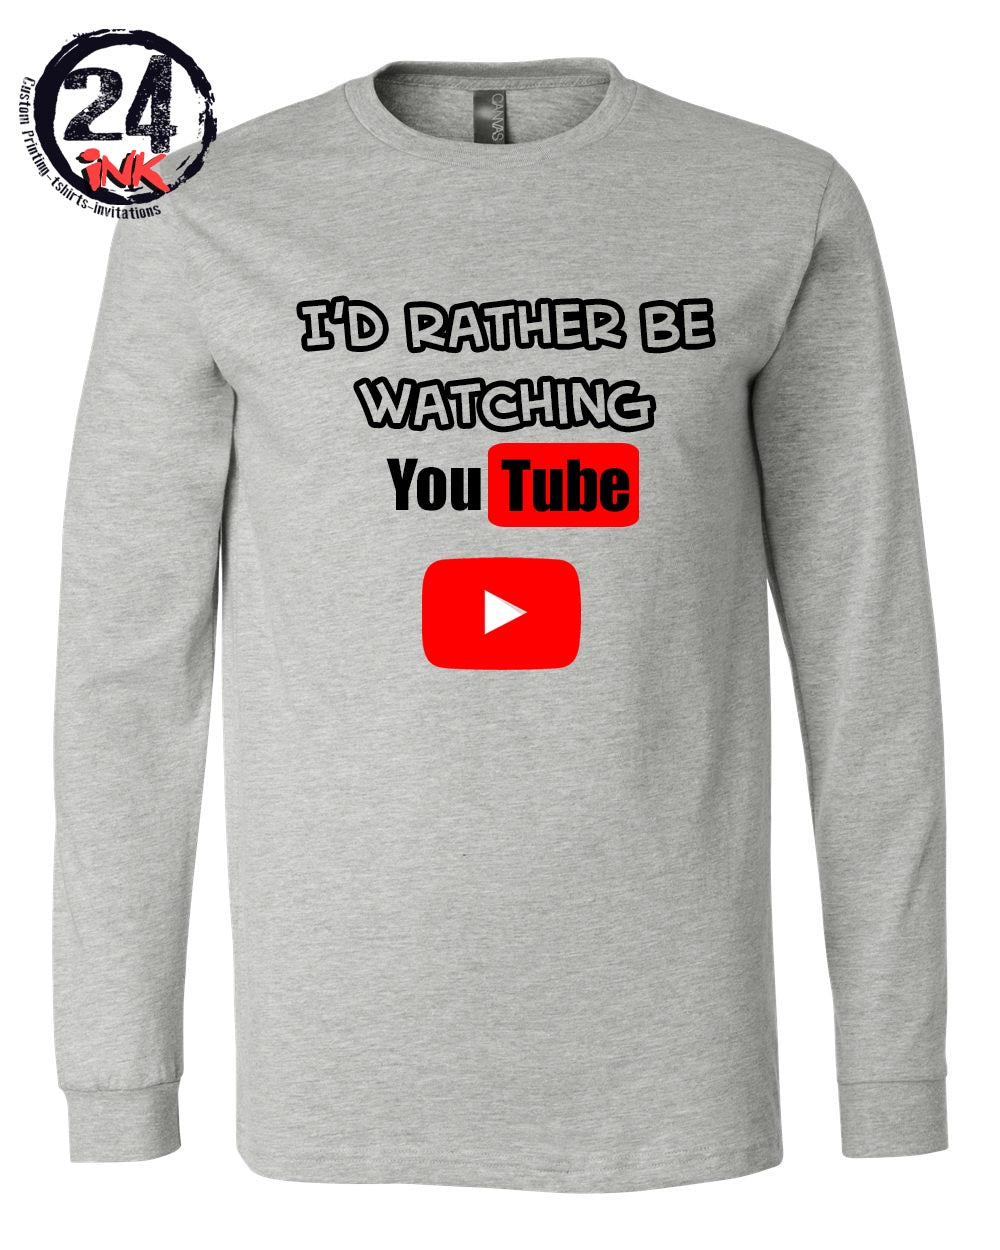 I'd rather be watching YouTube Shirt